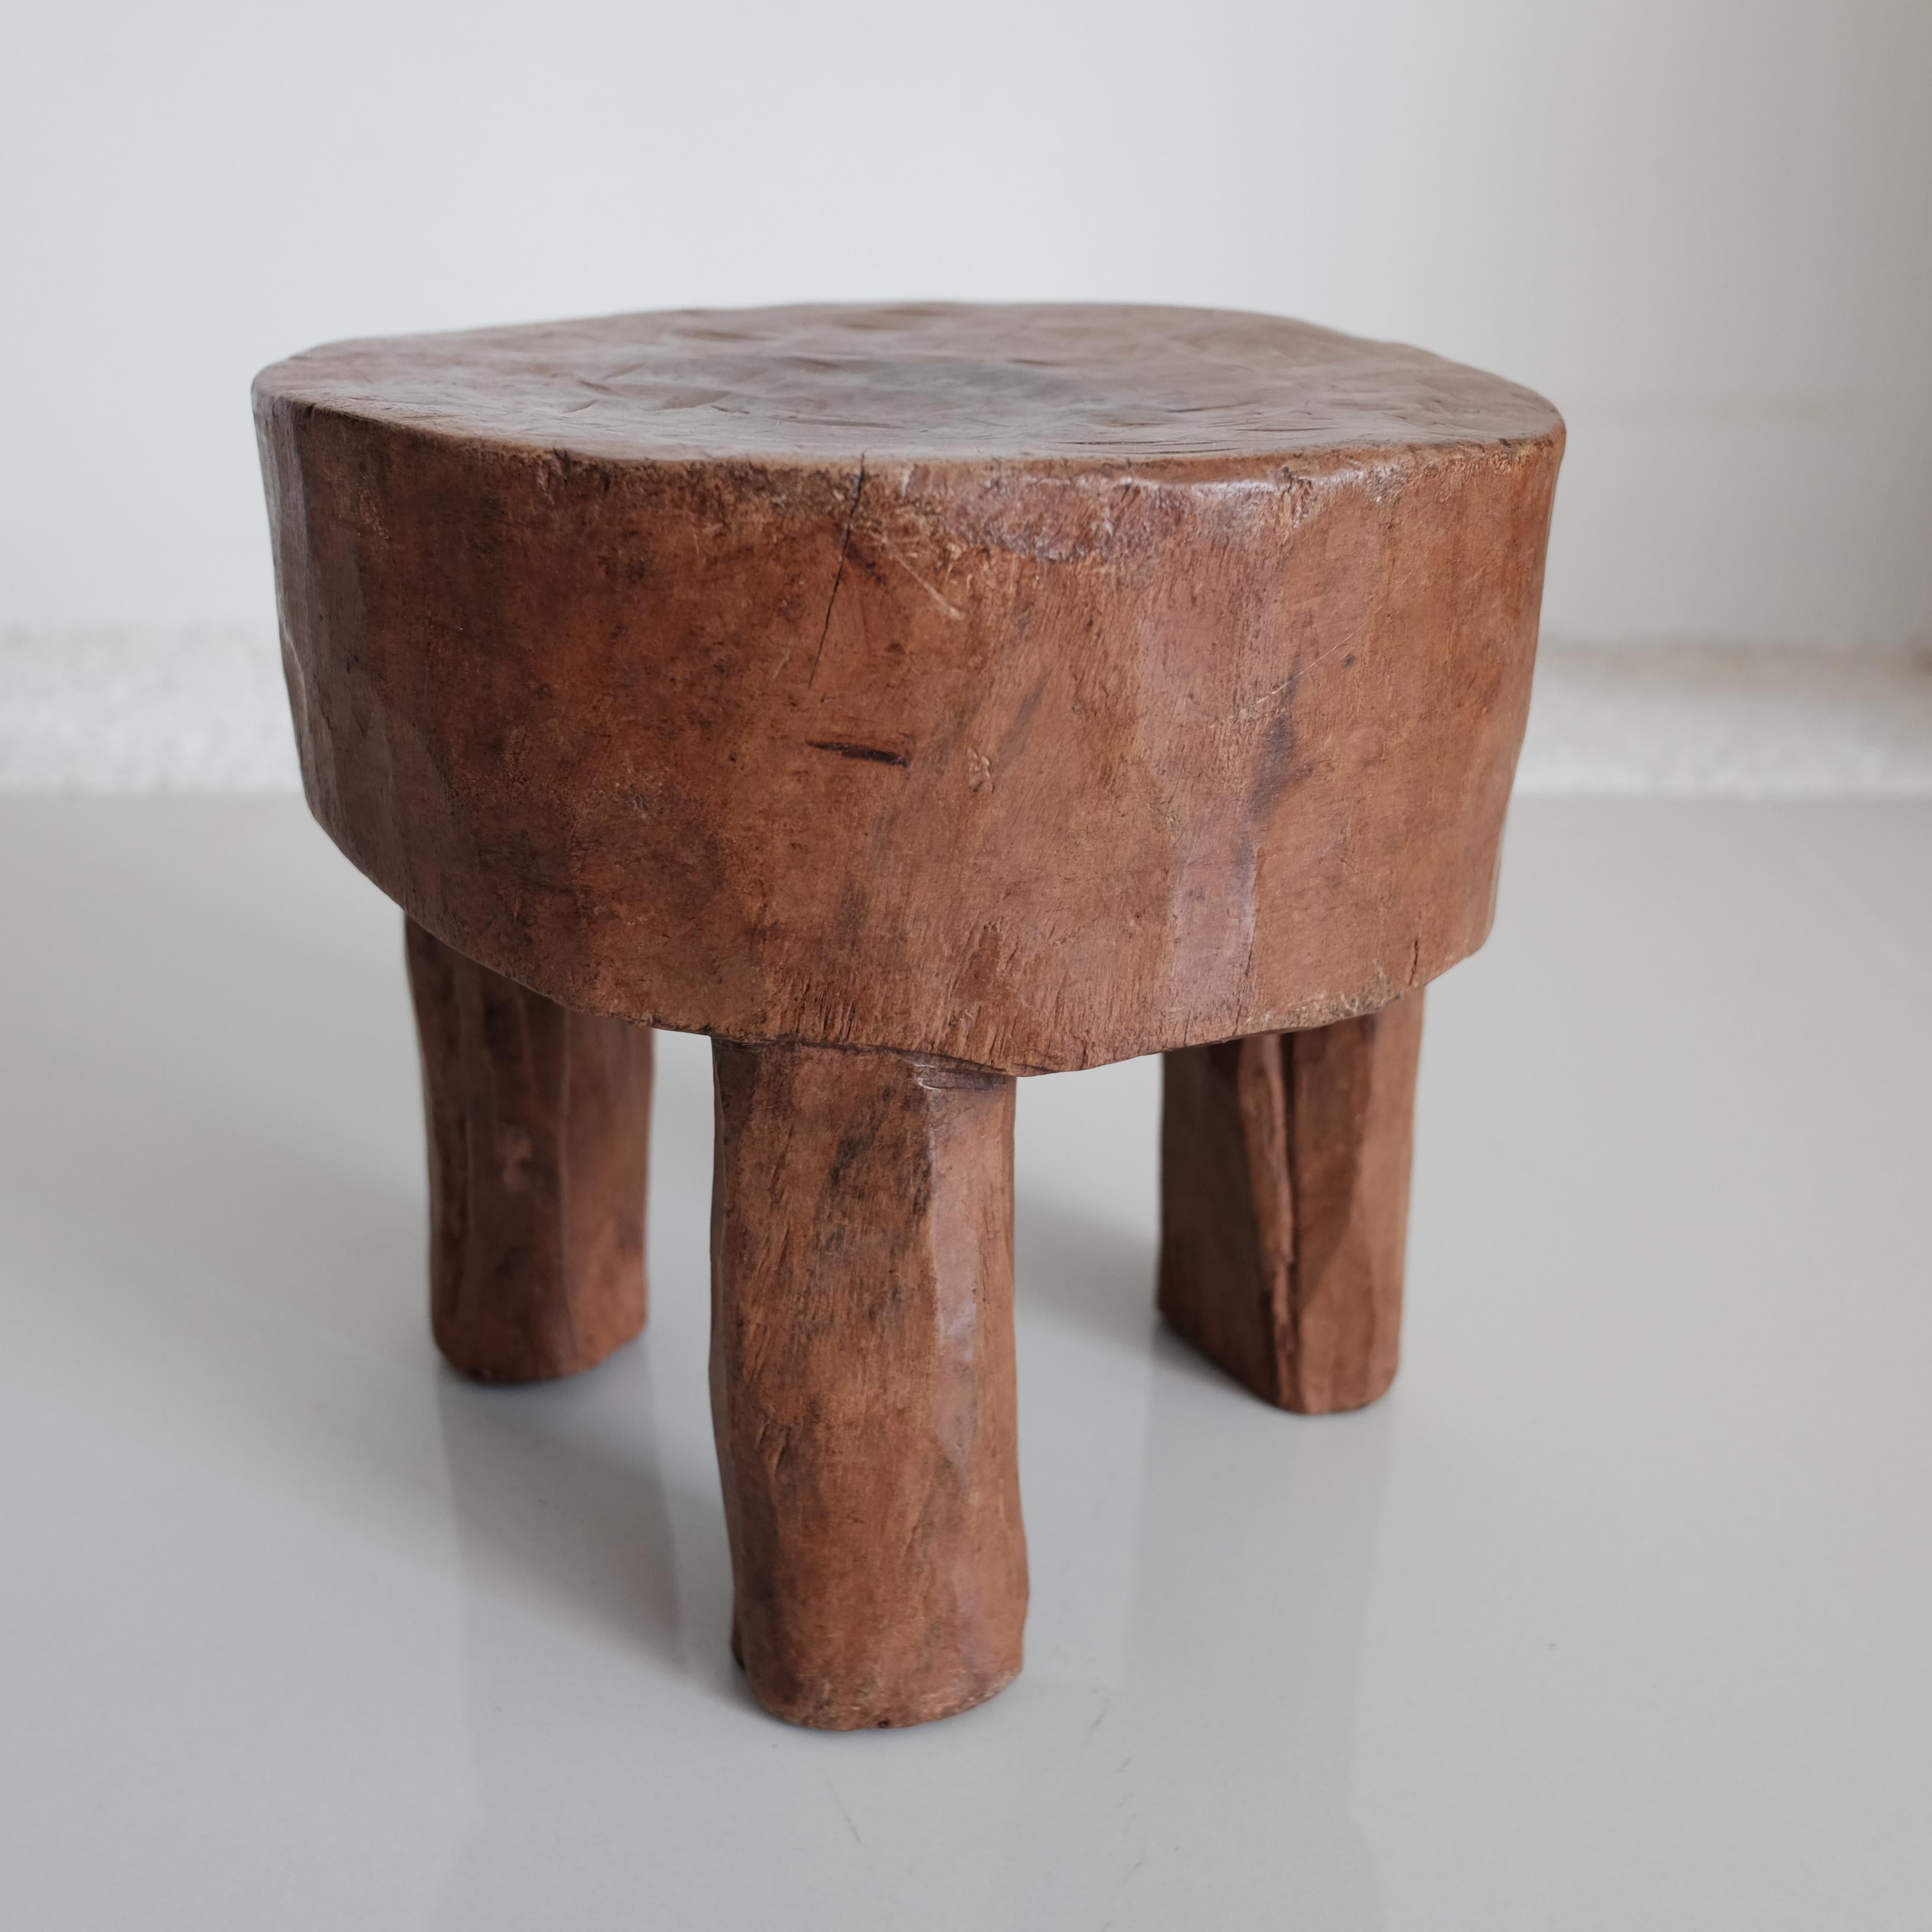 Hand-Carved Primitive Low Stool from the Senufo tribe of Ivory Coast